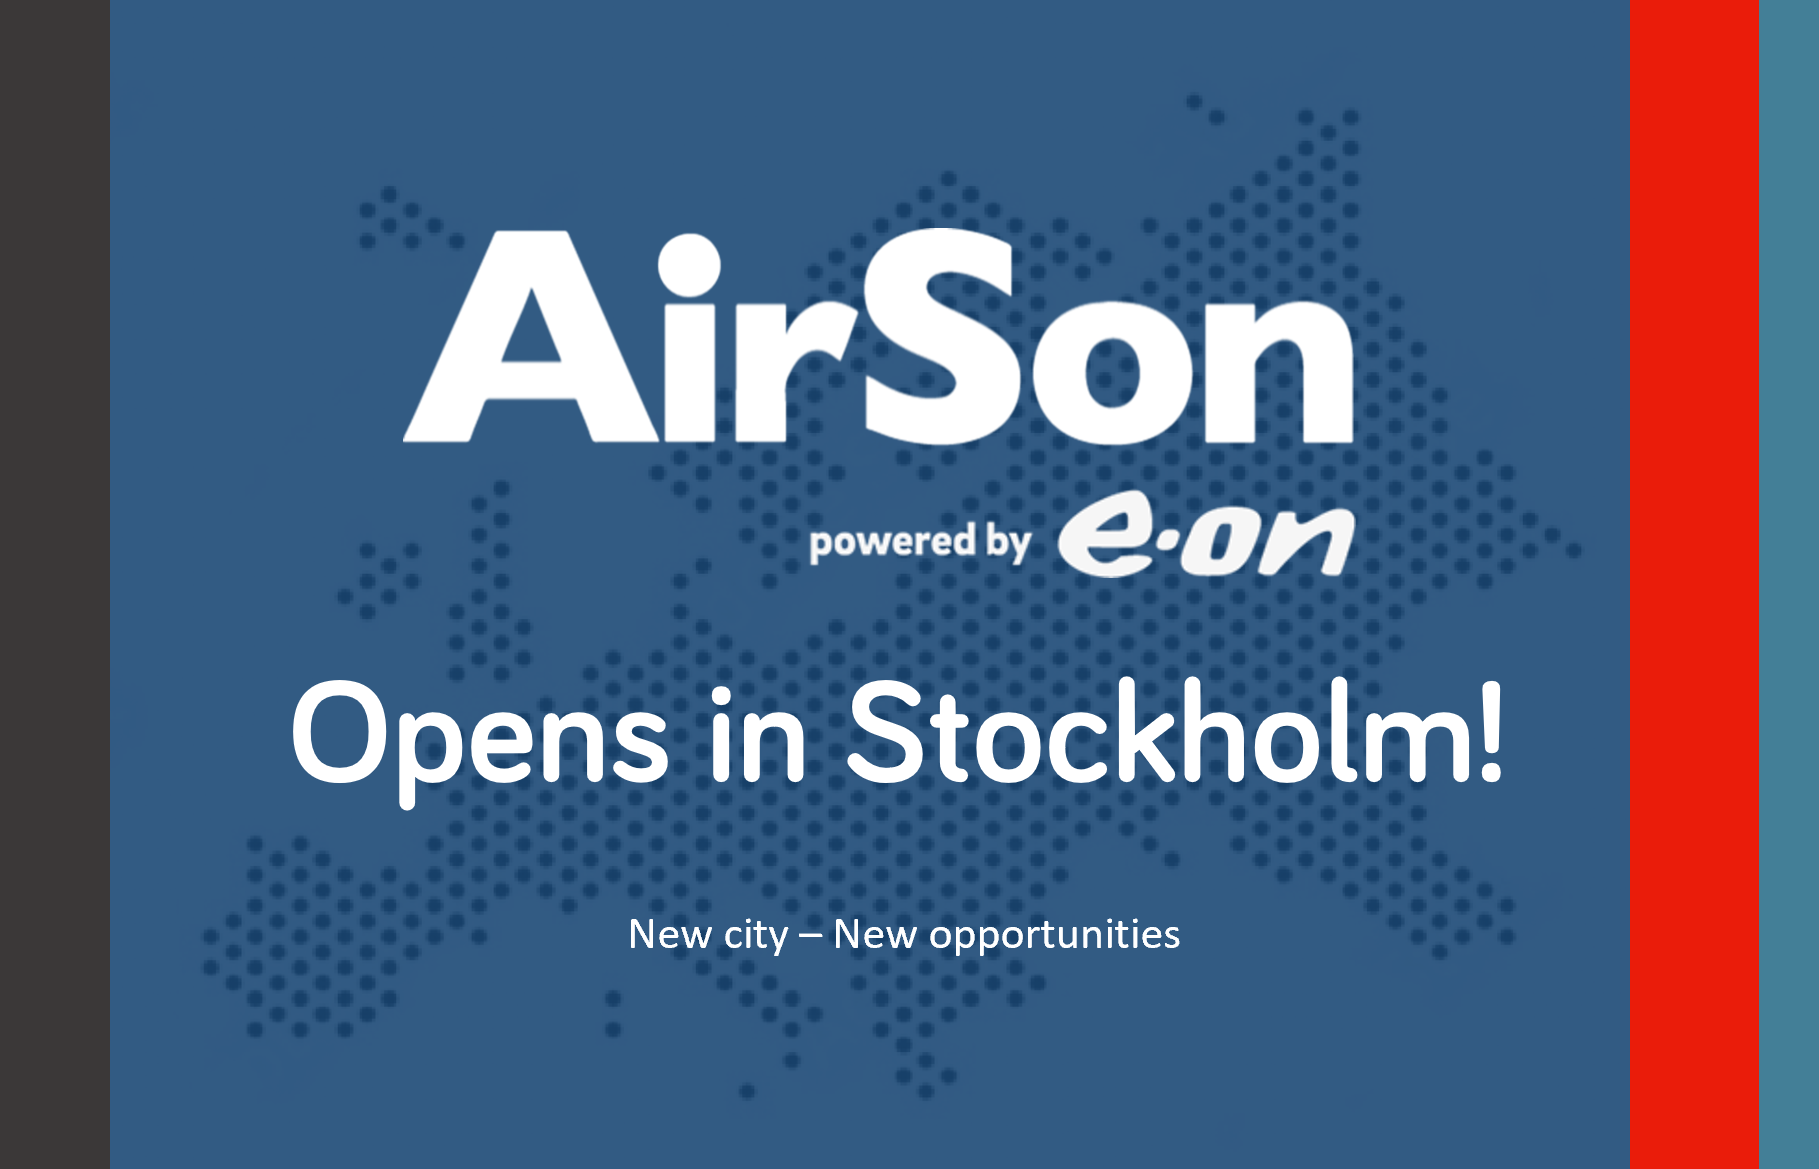 AirSon opens in Stockholm